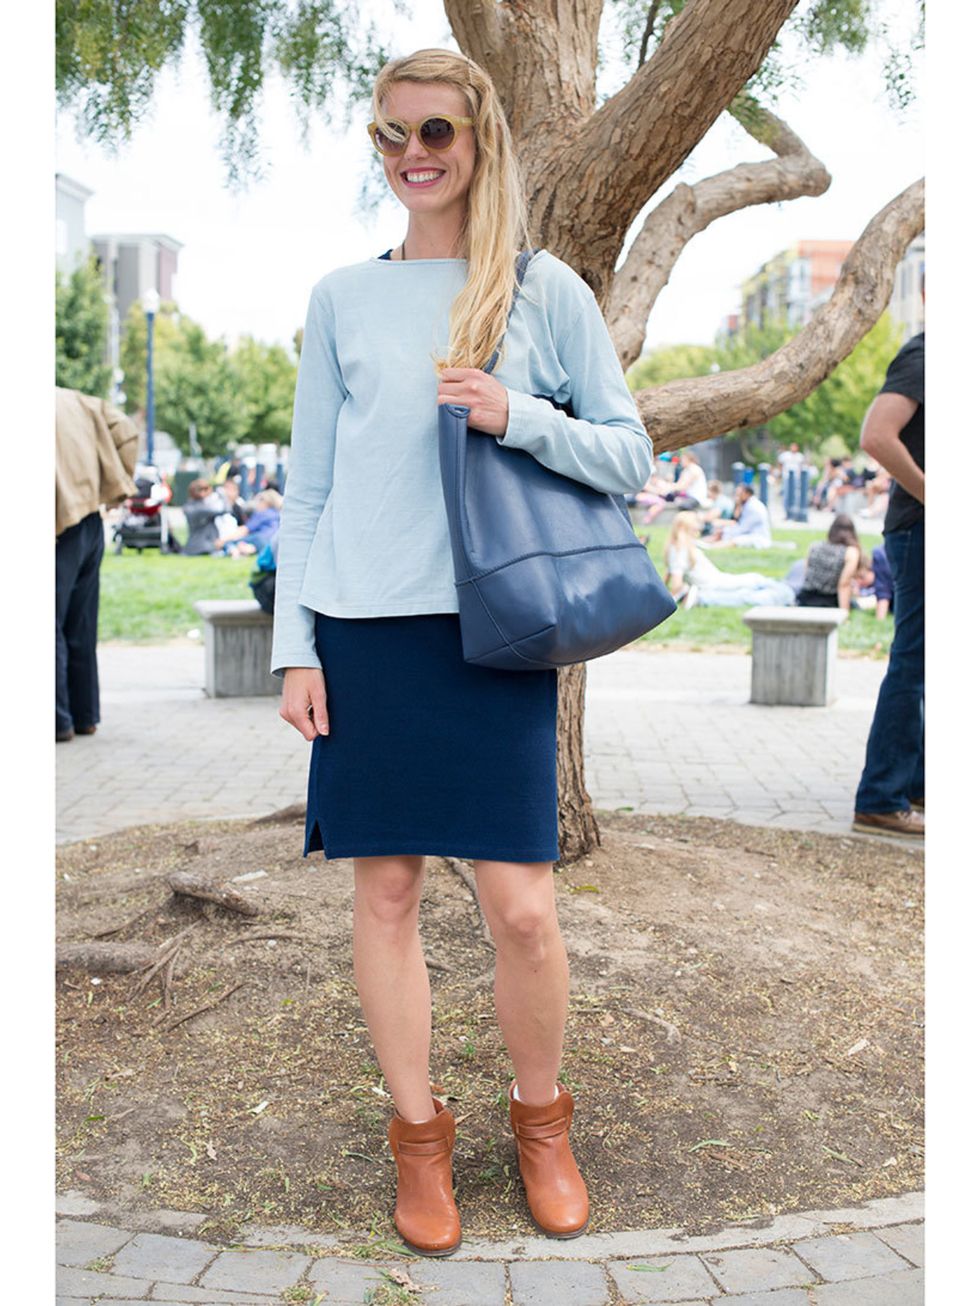 Peggy Friar wears Taylor Switch top and dress, J.Crew boots and bag with Madewell sunglasses.